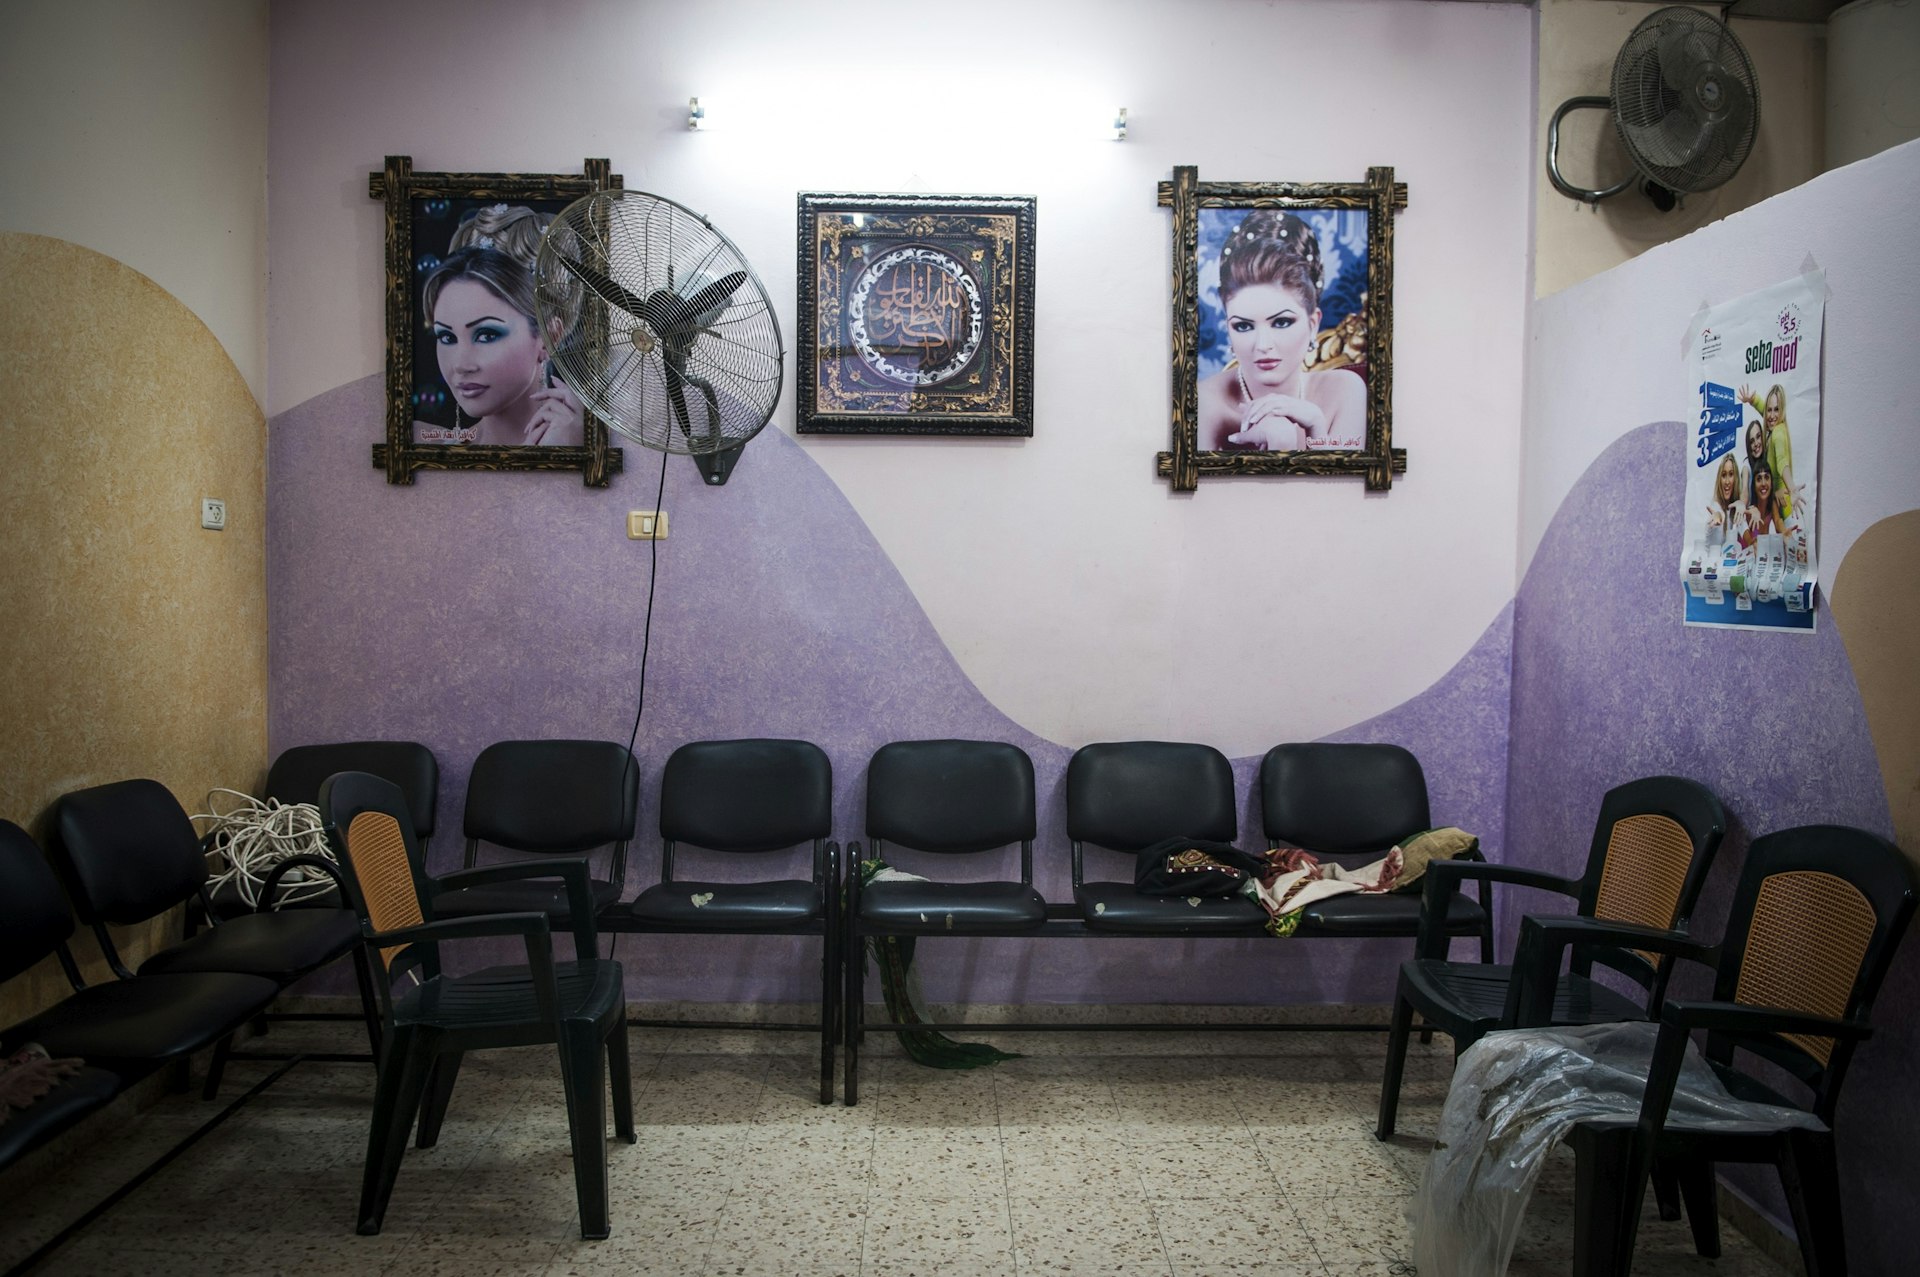 Growing up on the Gaza Strip